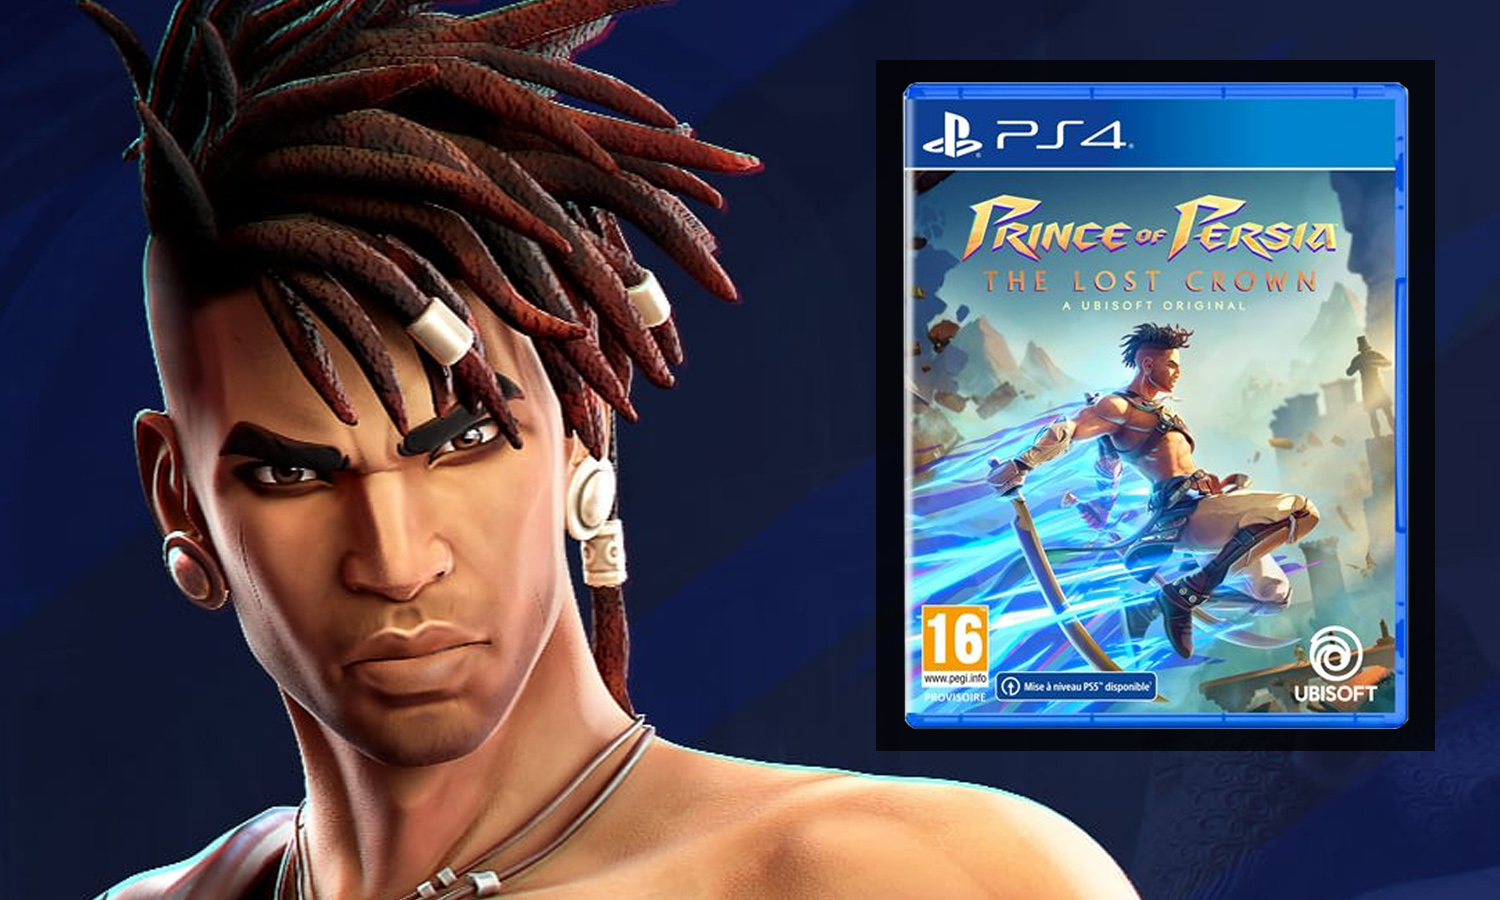 https://chocobonplan.com/wp-content/uploads/2023/06/slider-prince-of-persia-the-lost-crown-ps4.jpg